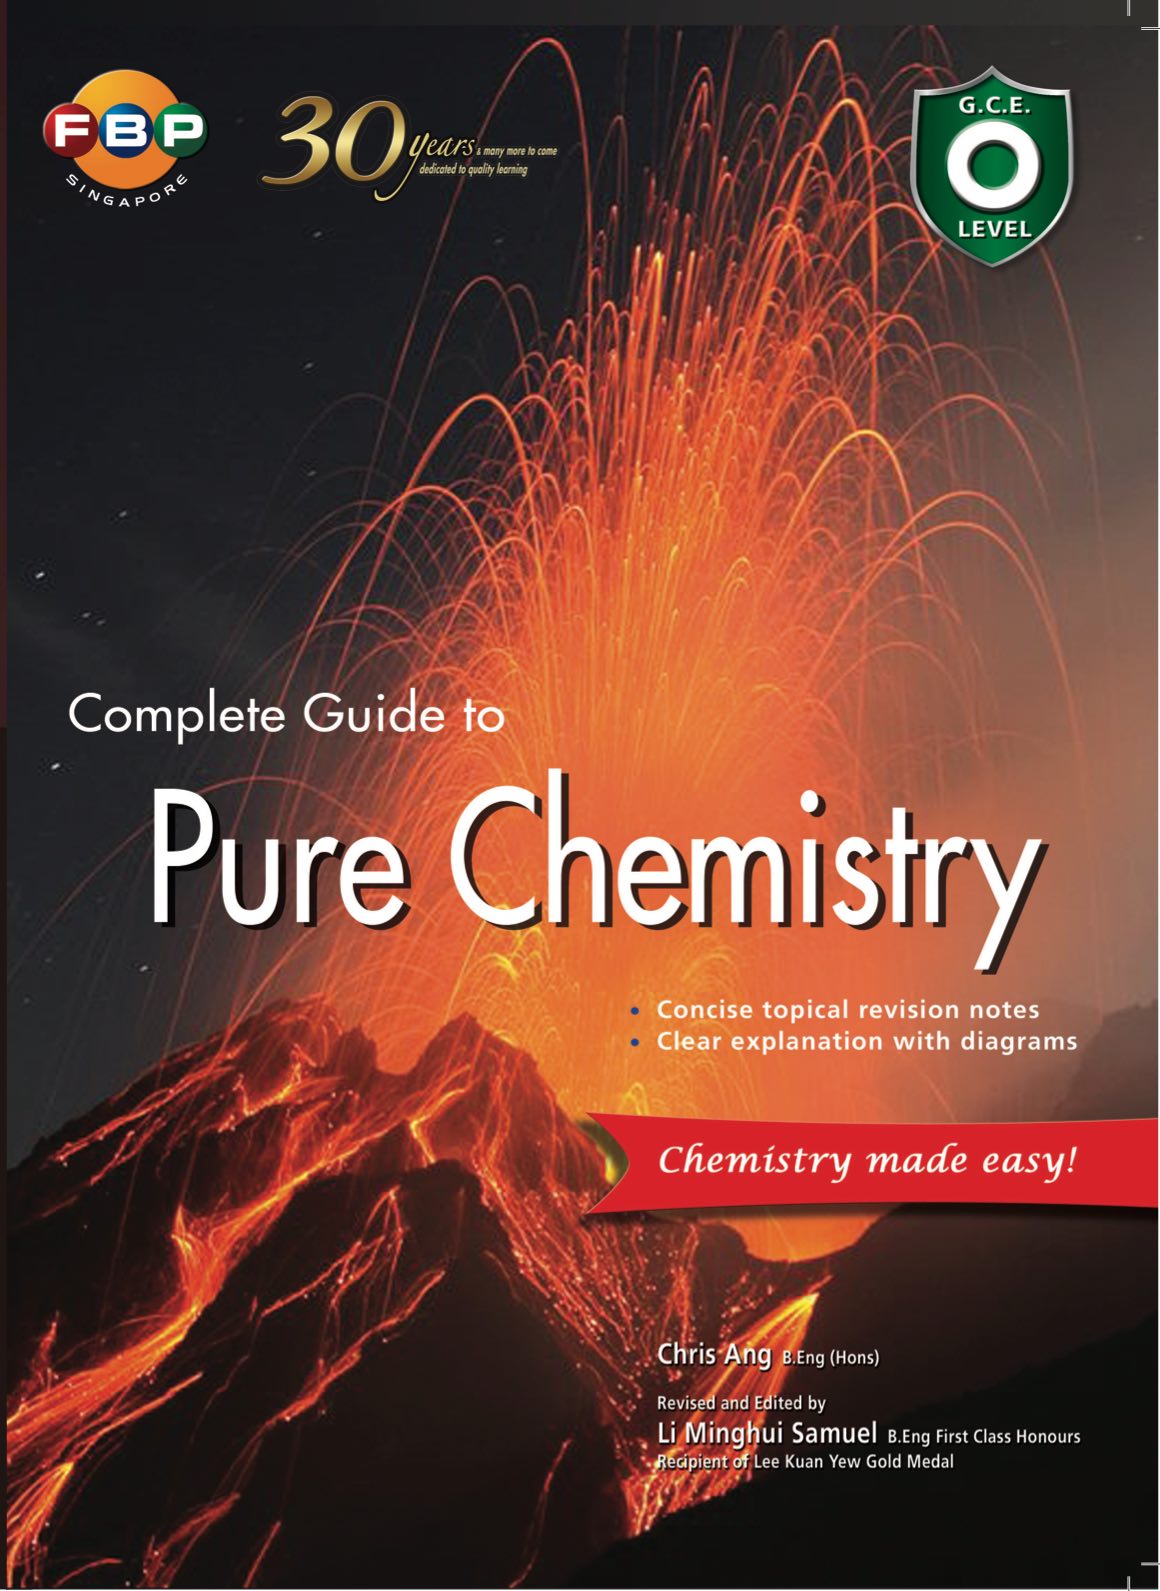 GCE O Level: Complete Guide to Pure Chemistry